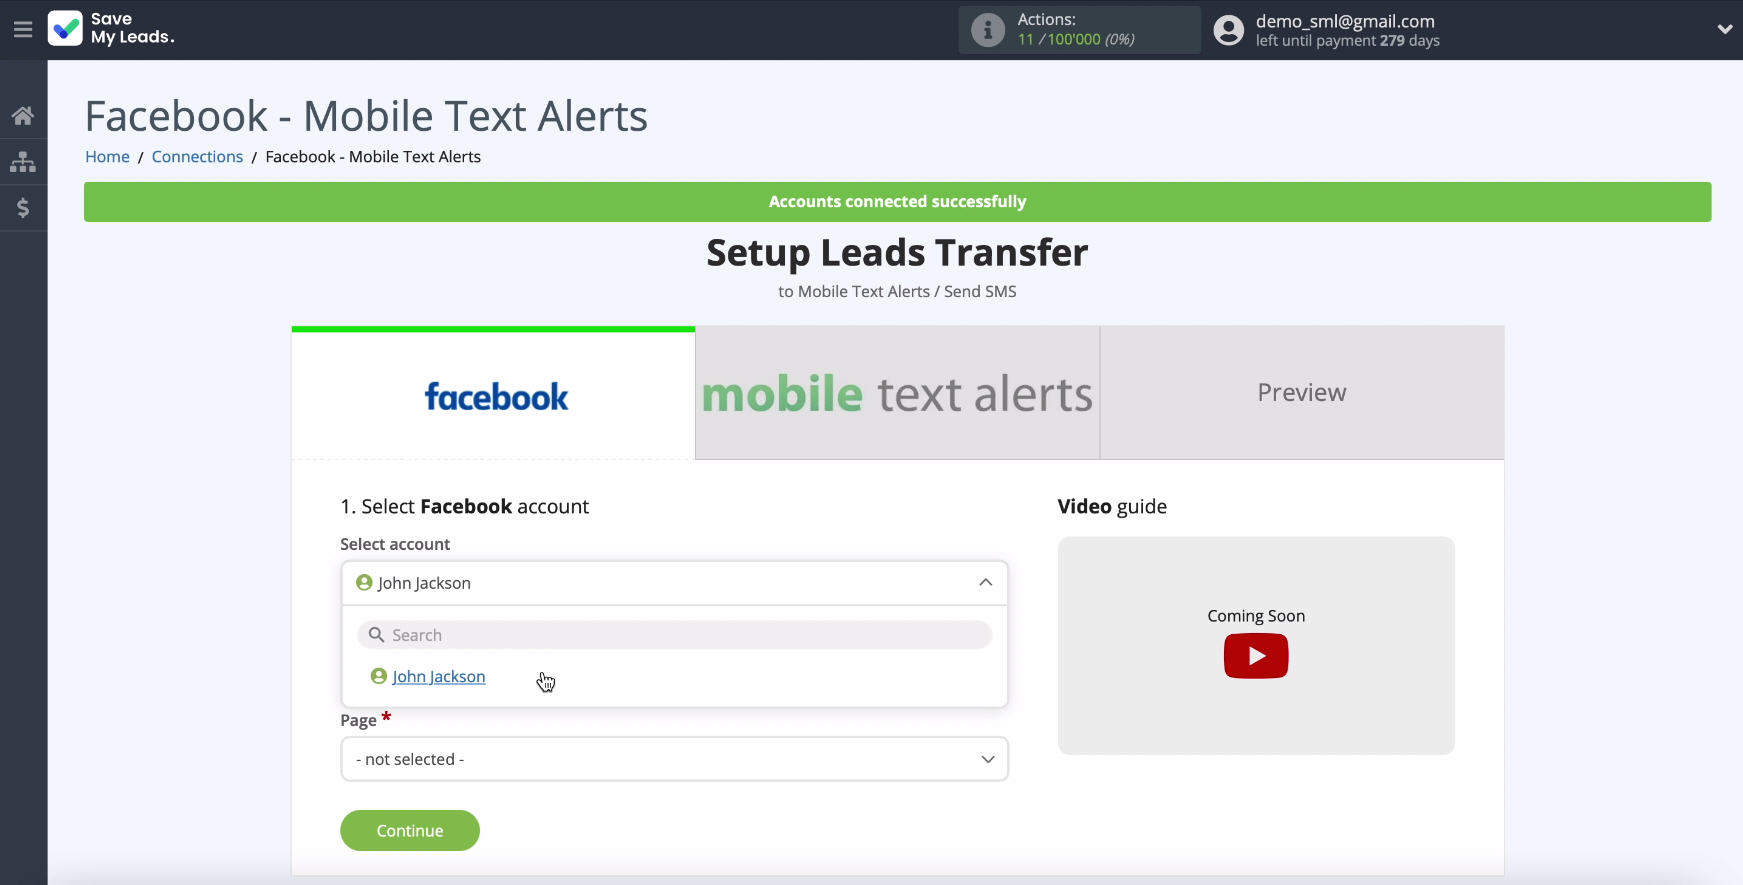 Facebook and Mobile Text Alerts integration | Select a connected account